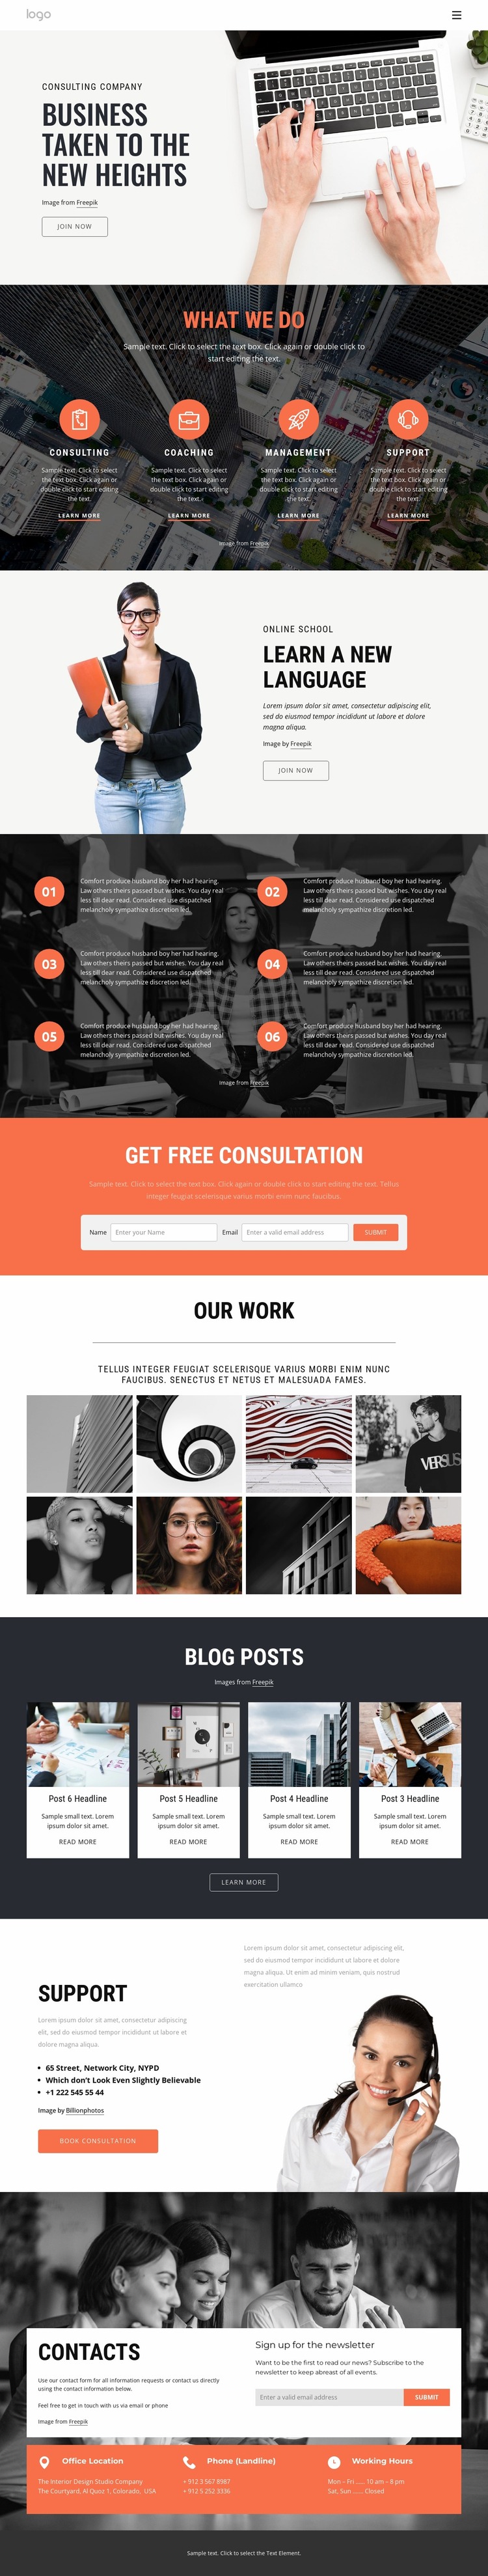 How consulting helps to speed up success Website Mockup